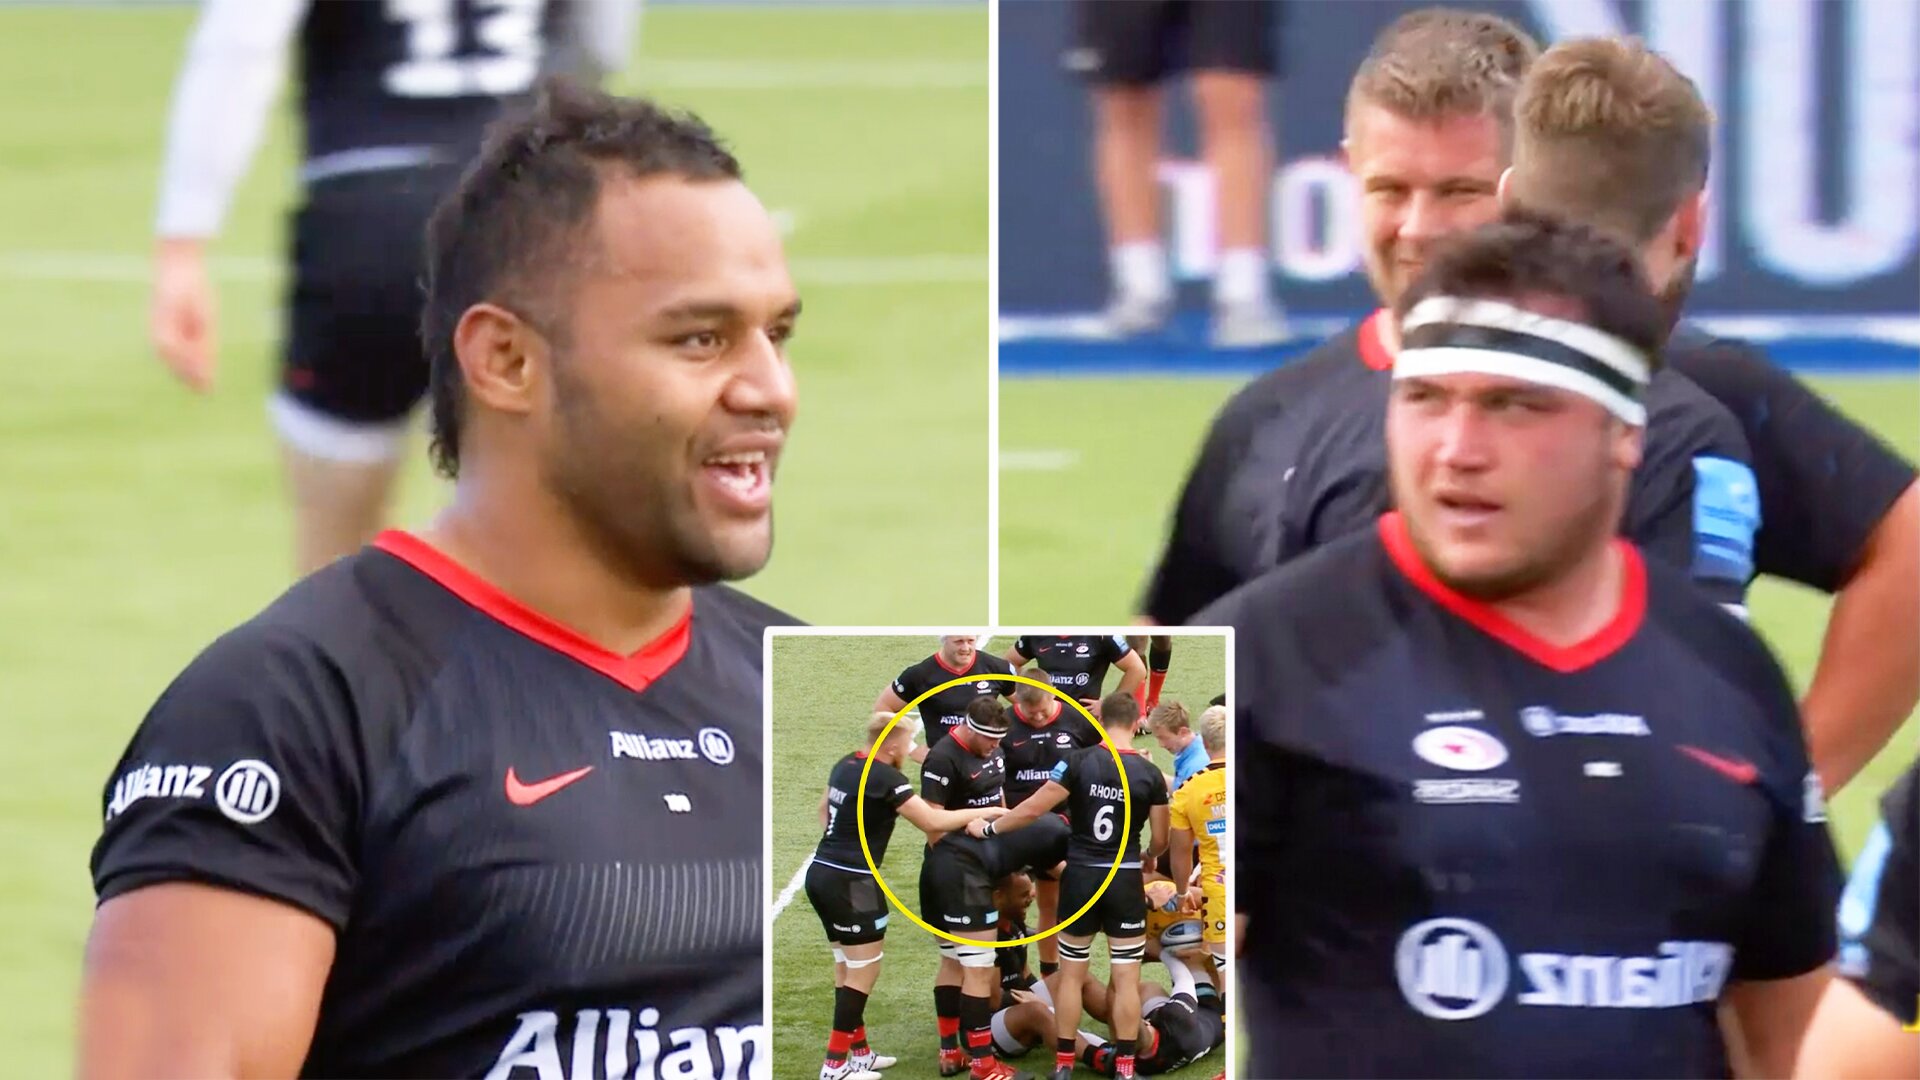 Wasps fans outraged at 'embarrassing' Saracens behaviour in last weekend's Premiership clash